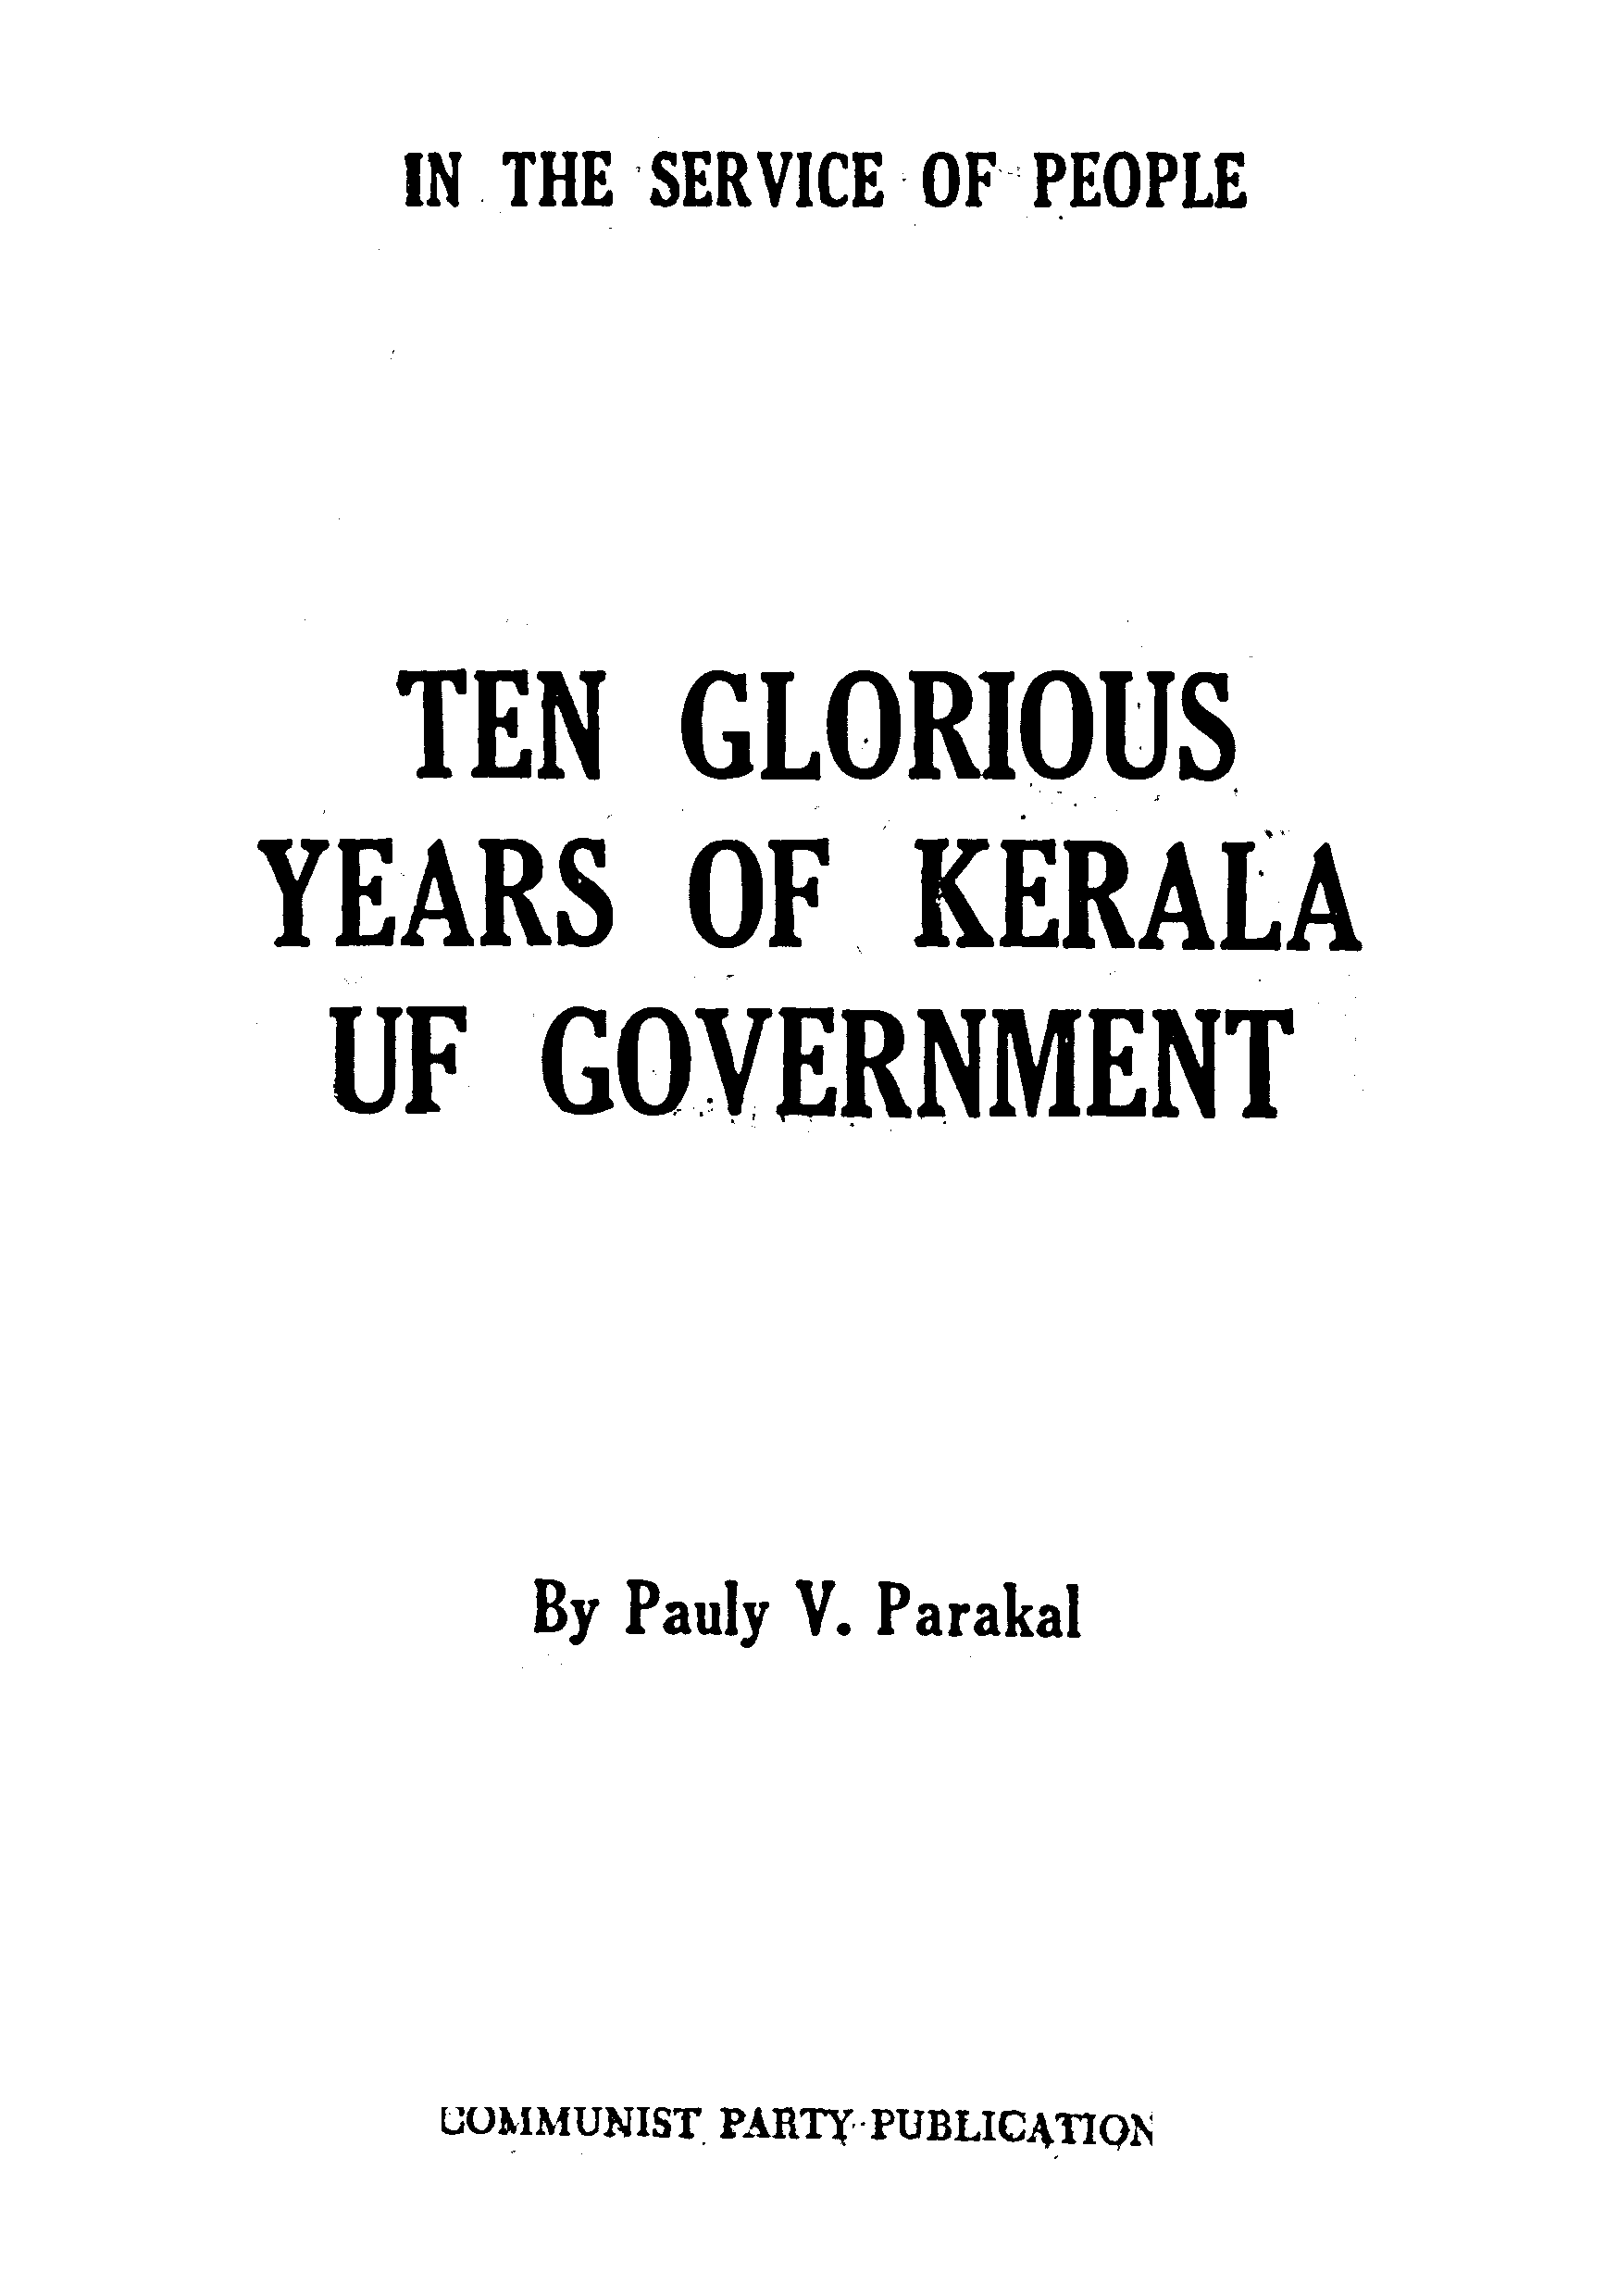 Ten glorious years of kerala of government 